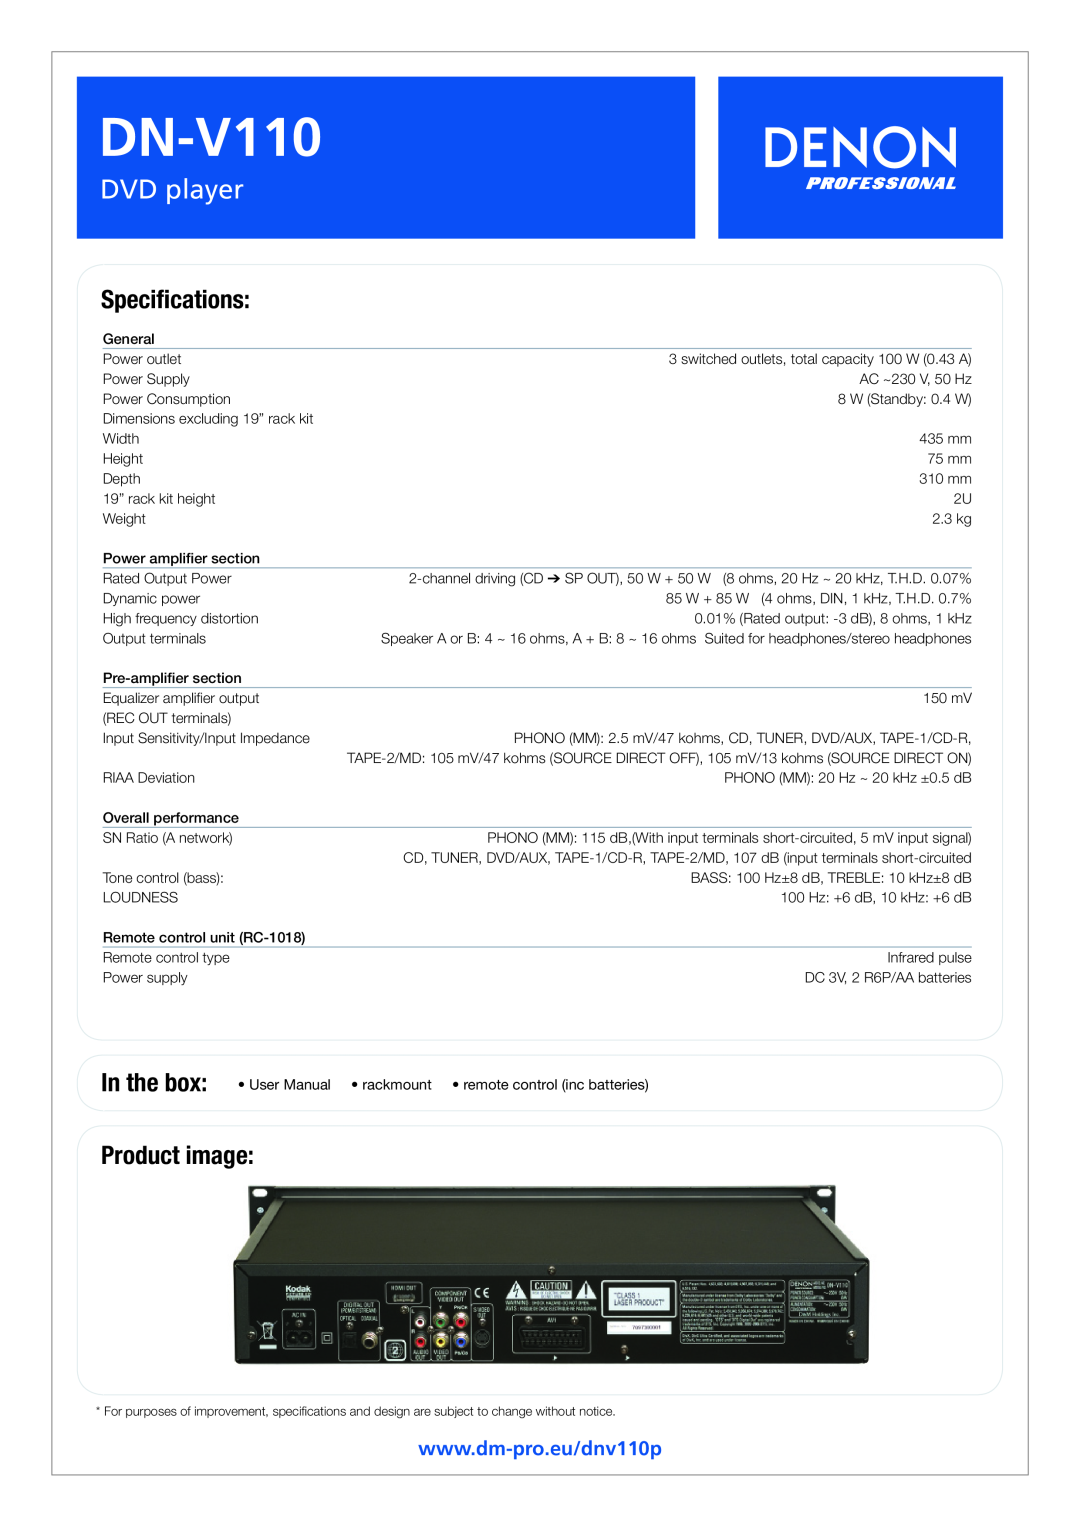 Denon DN-V110 manual Speciﬁcations, Product image, DVD player 